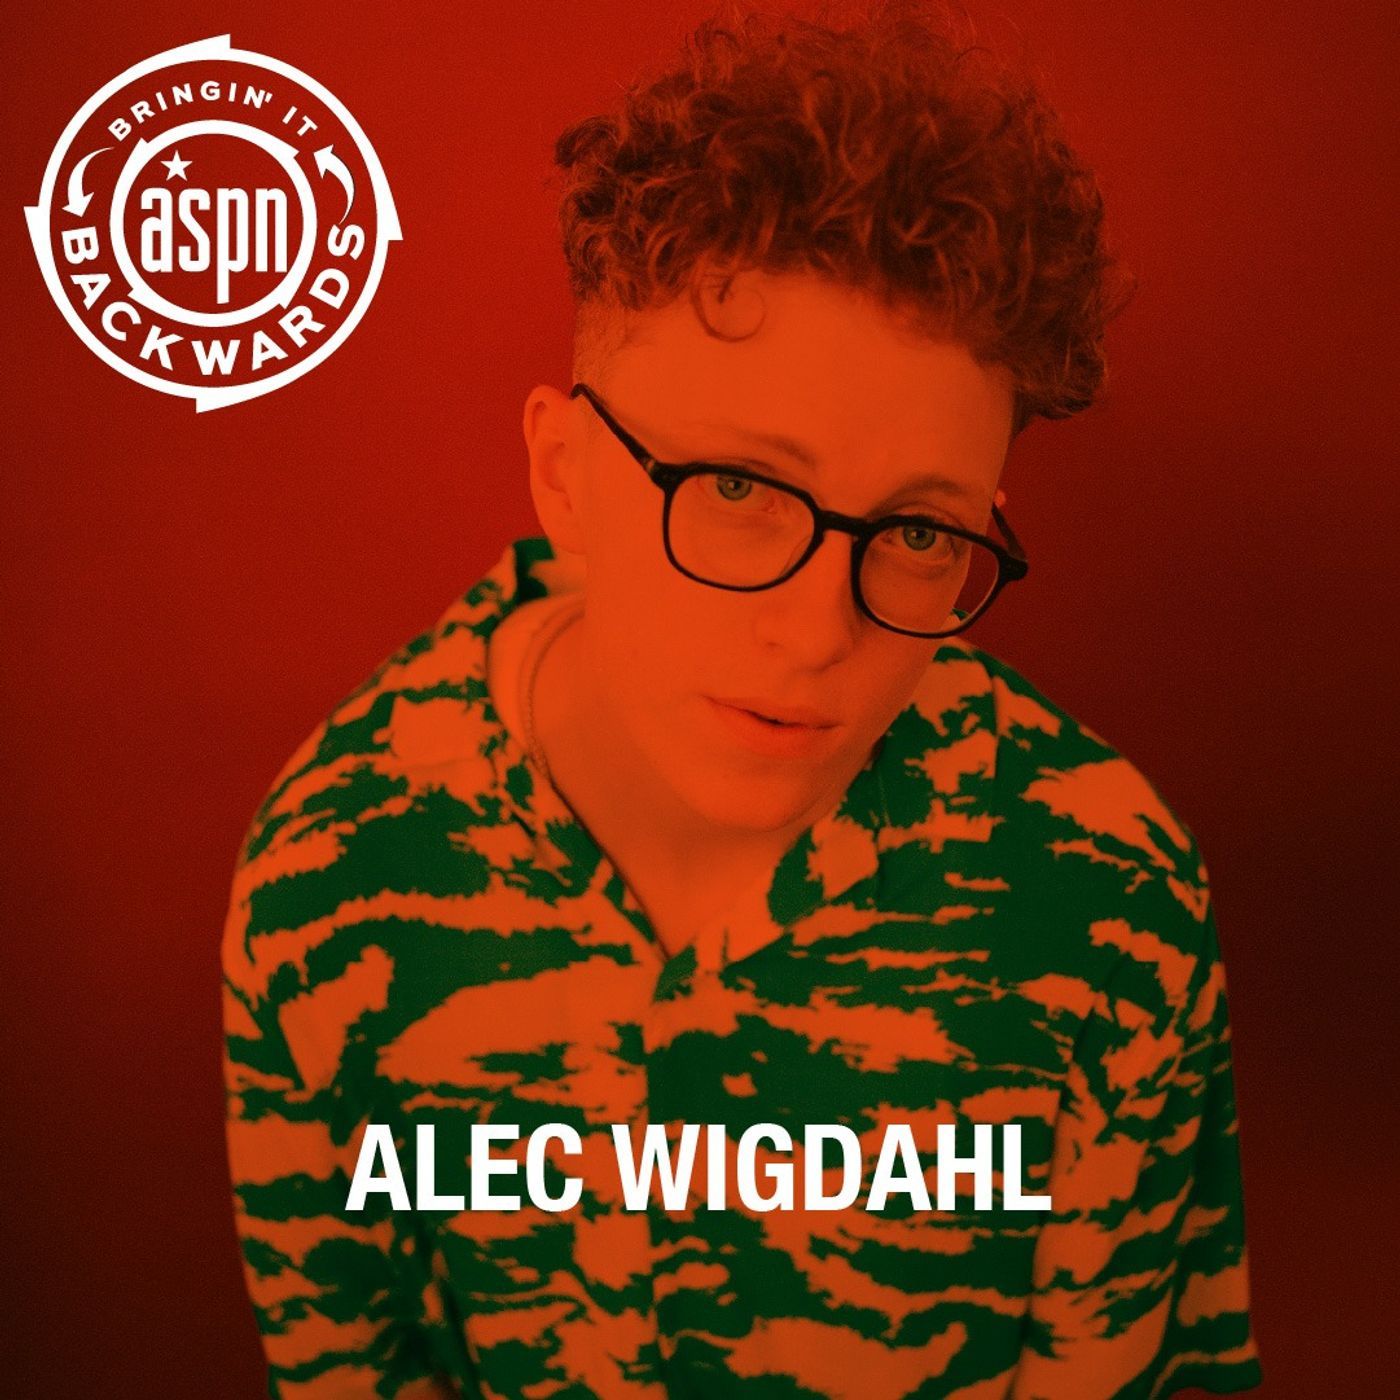 Interview with Alec Wigdahl Image